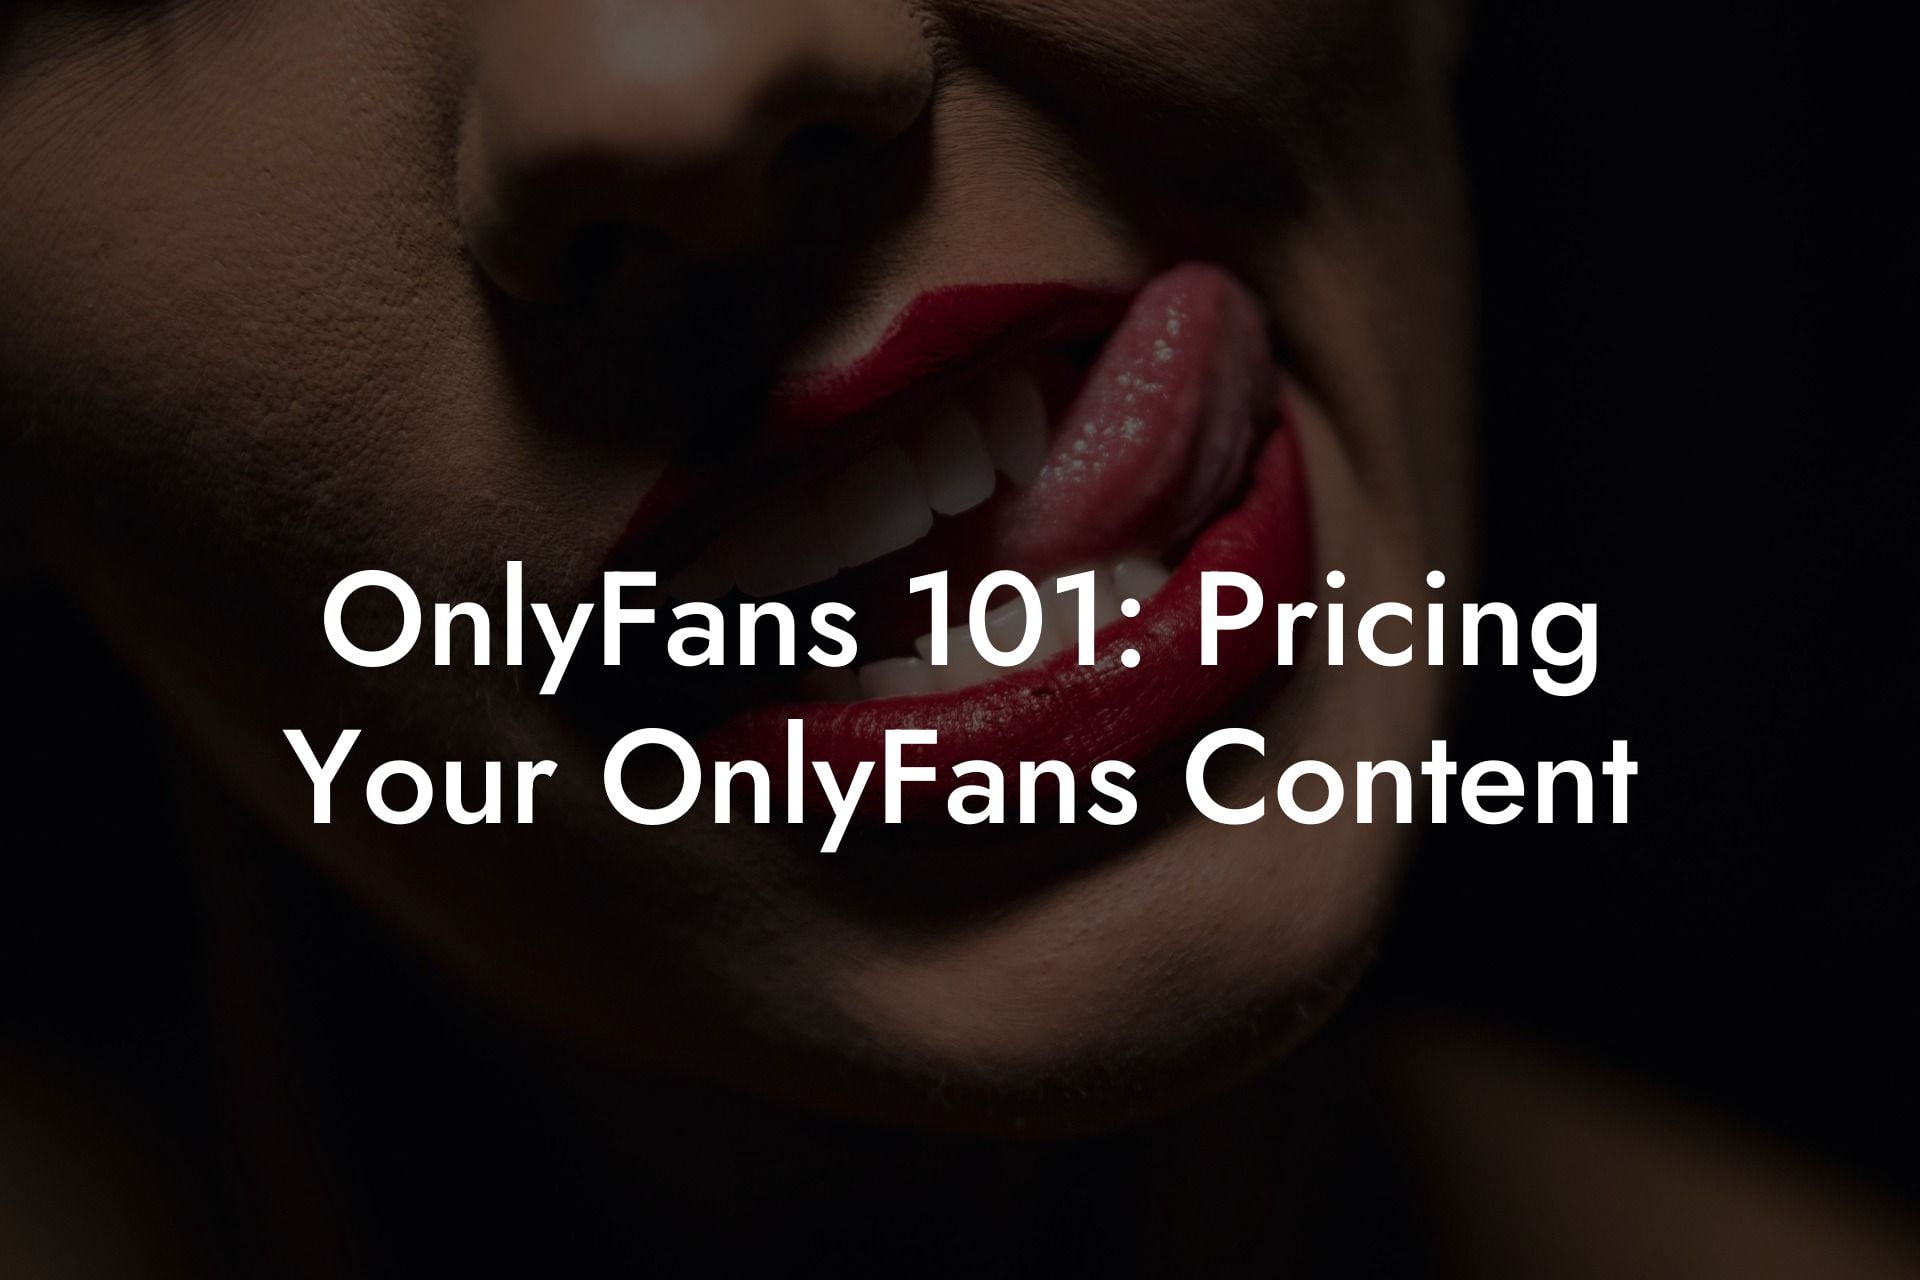 OnlyFans 101: Pricing Your OnlyFans Content